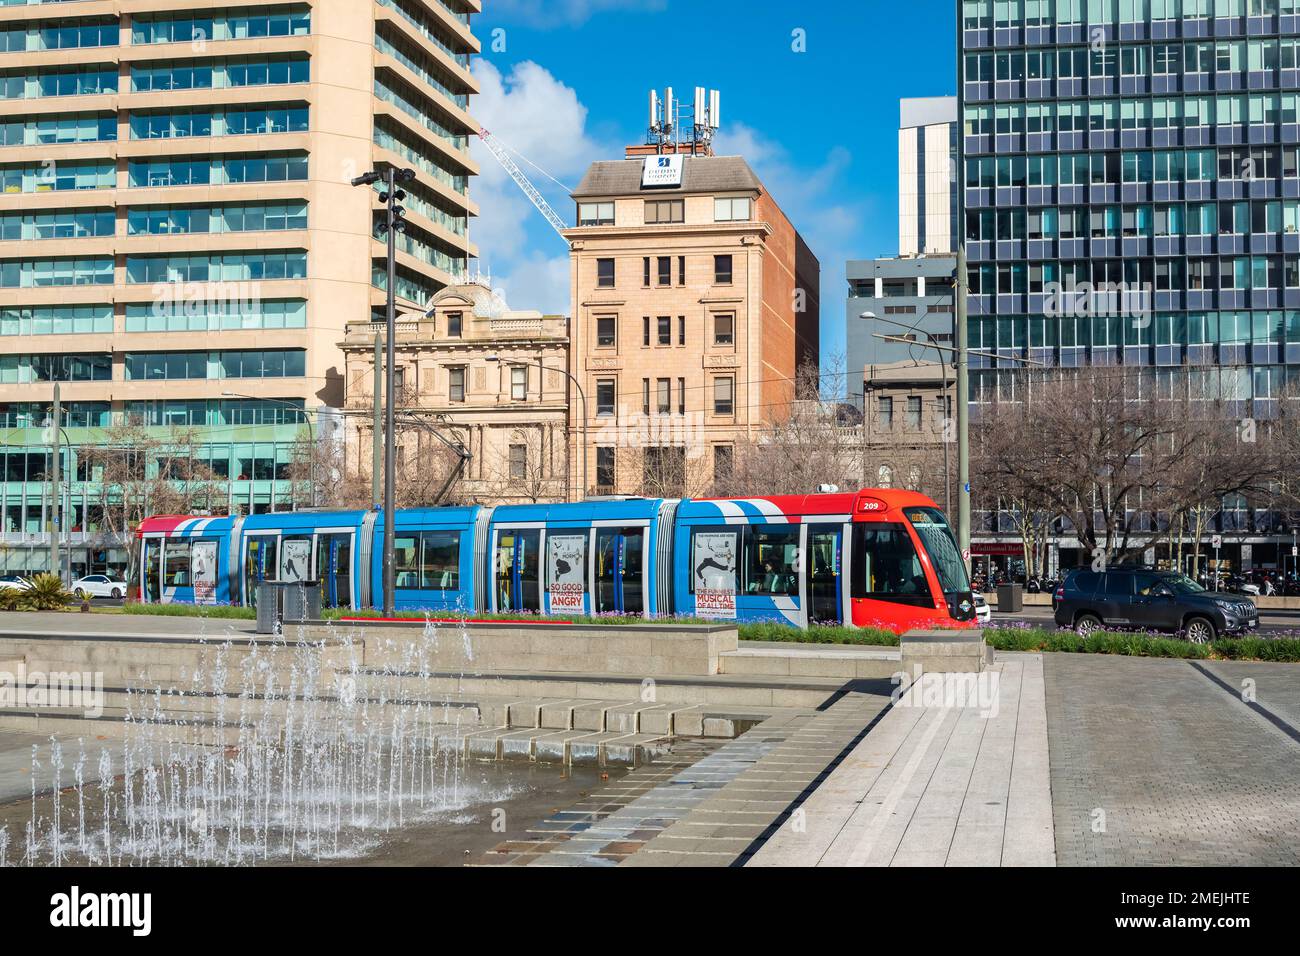 Adelaide City, South Australia - August 19, 2019: Modern Adelaide Metro tram crossing Victoria Square on a bright morning Stock Photo